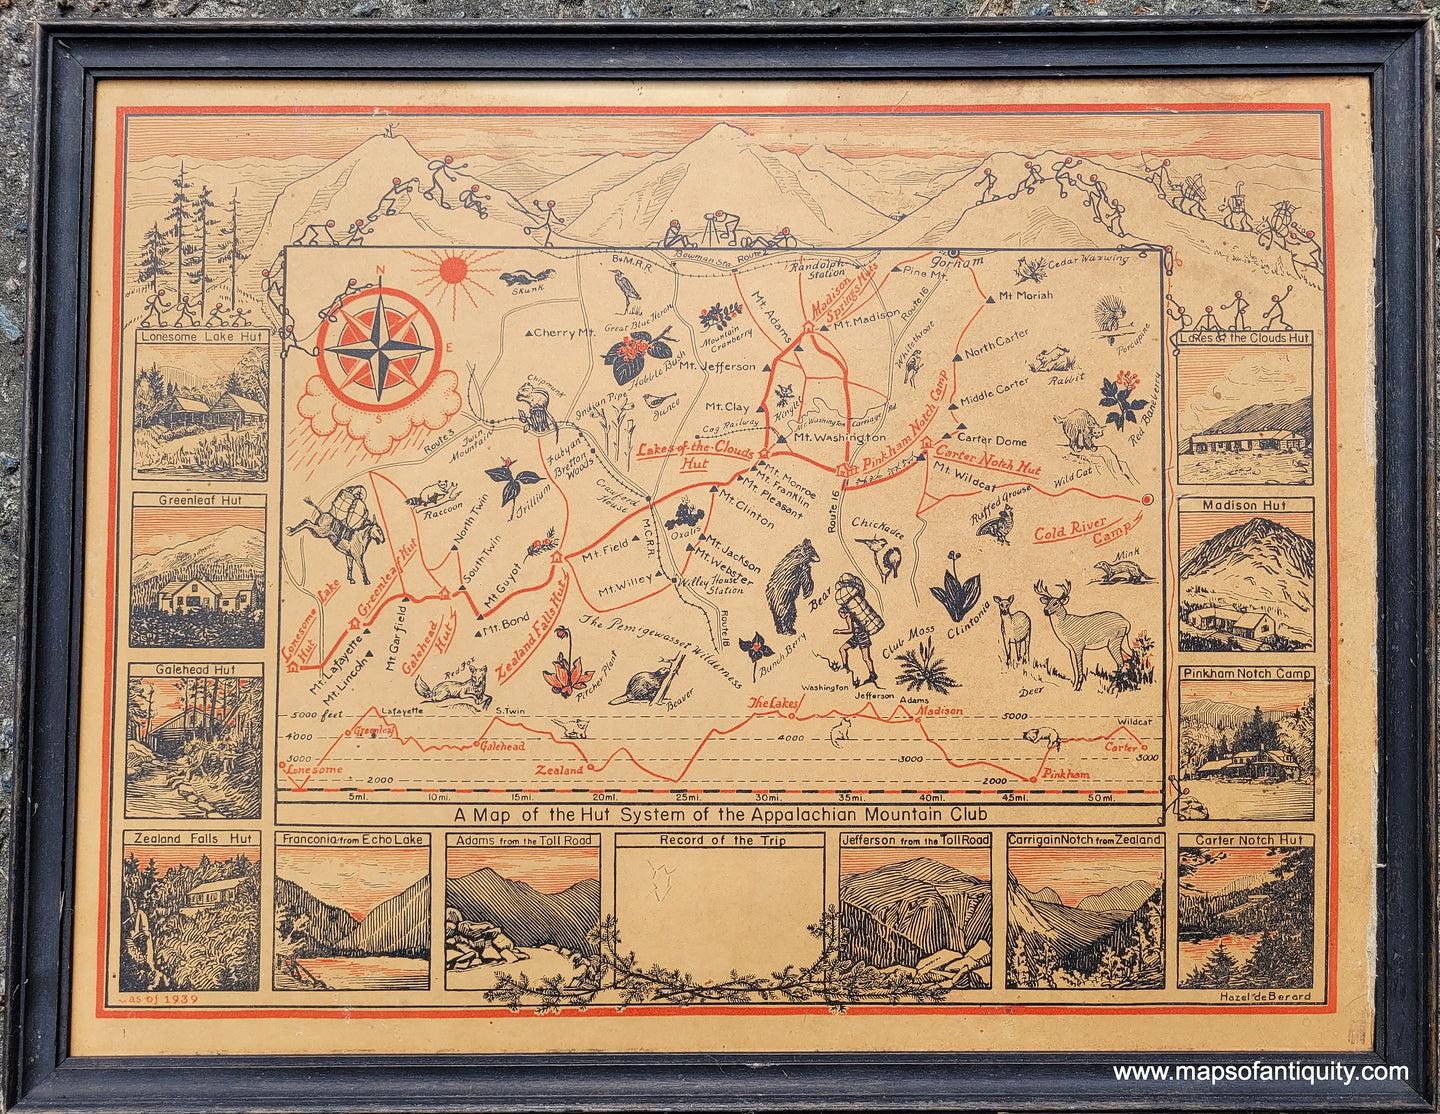 Genuine-Antique-Map-A-Map-of-the-Hut-System-of-the-Appalachian-Mountain-Club-1939-Hazel-de-Berard-Maps-Of-Antiquity